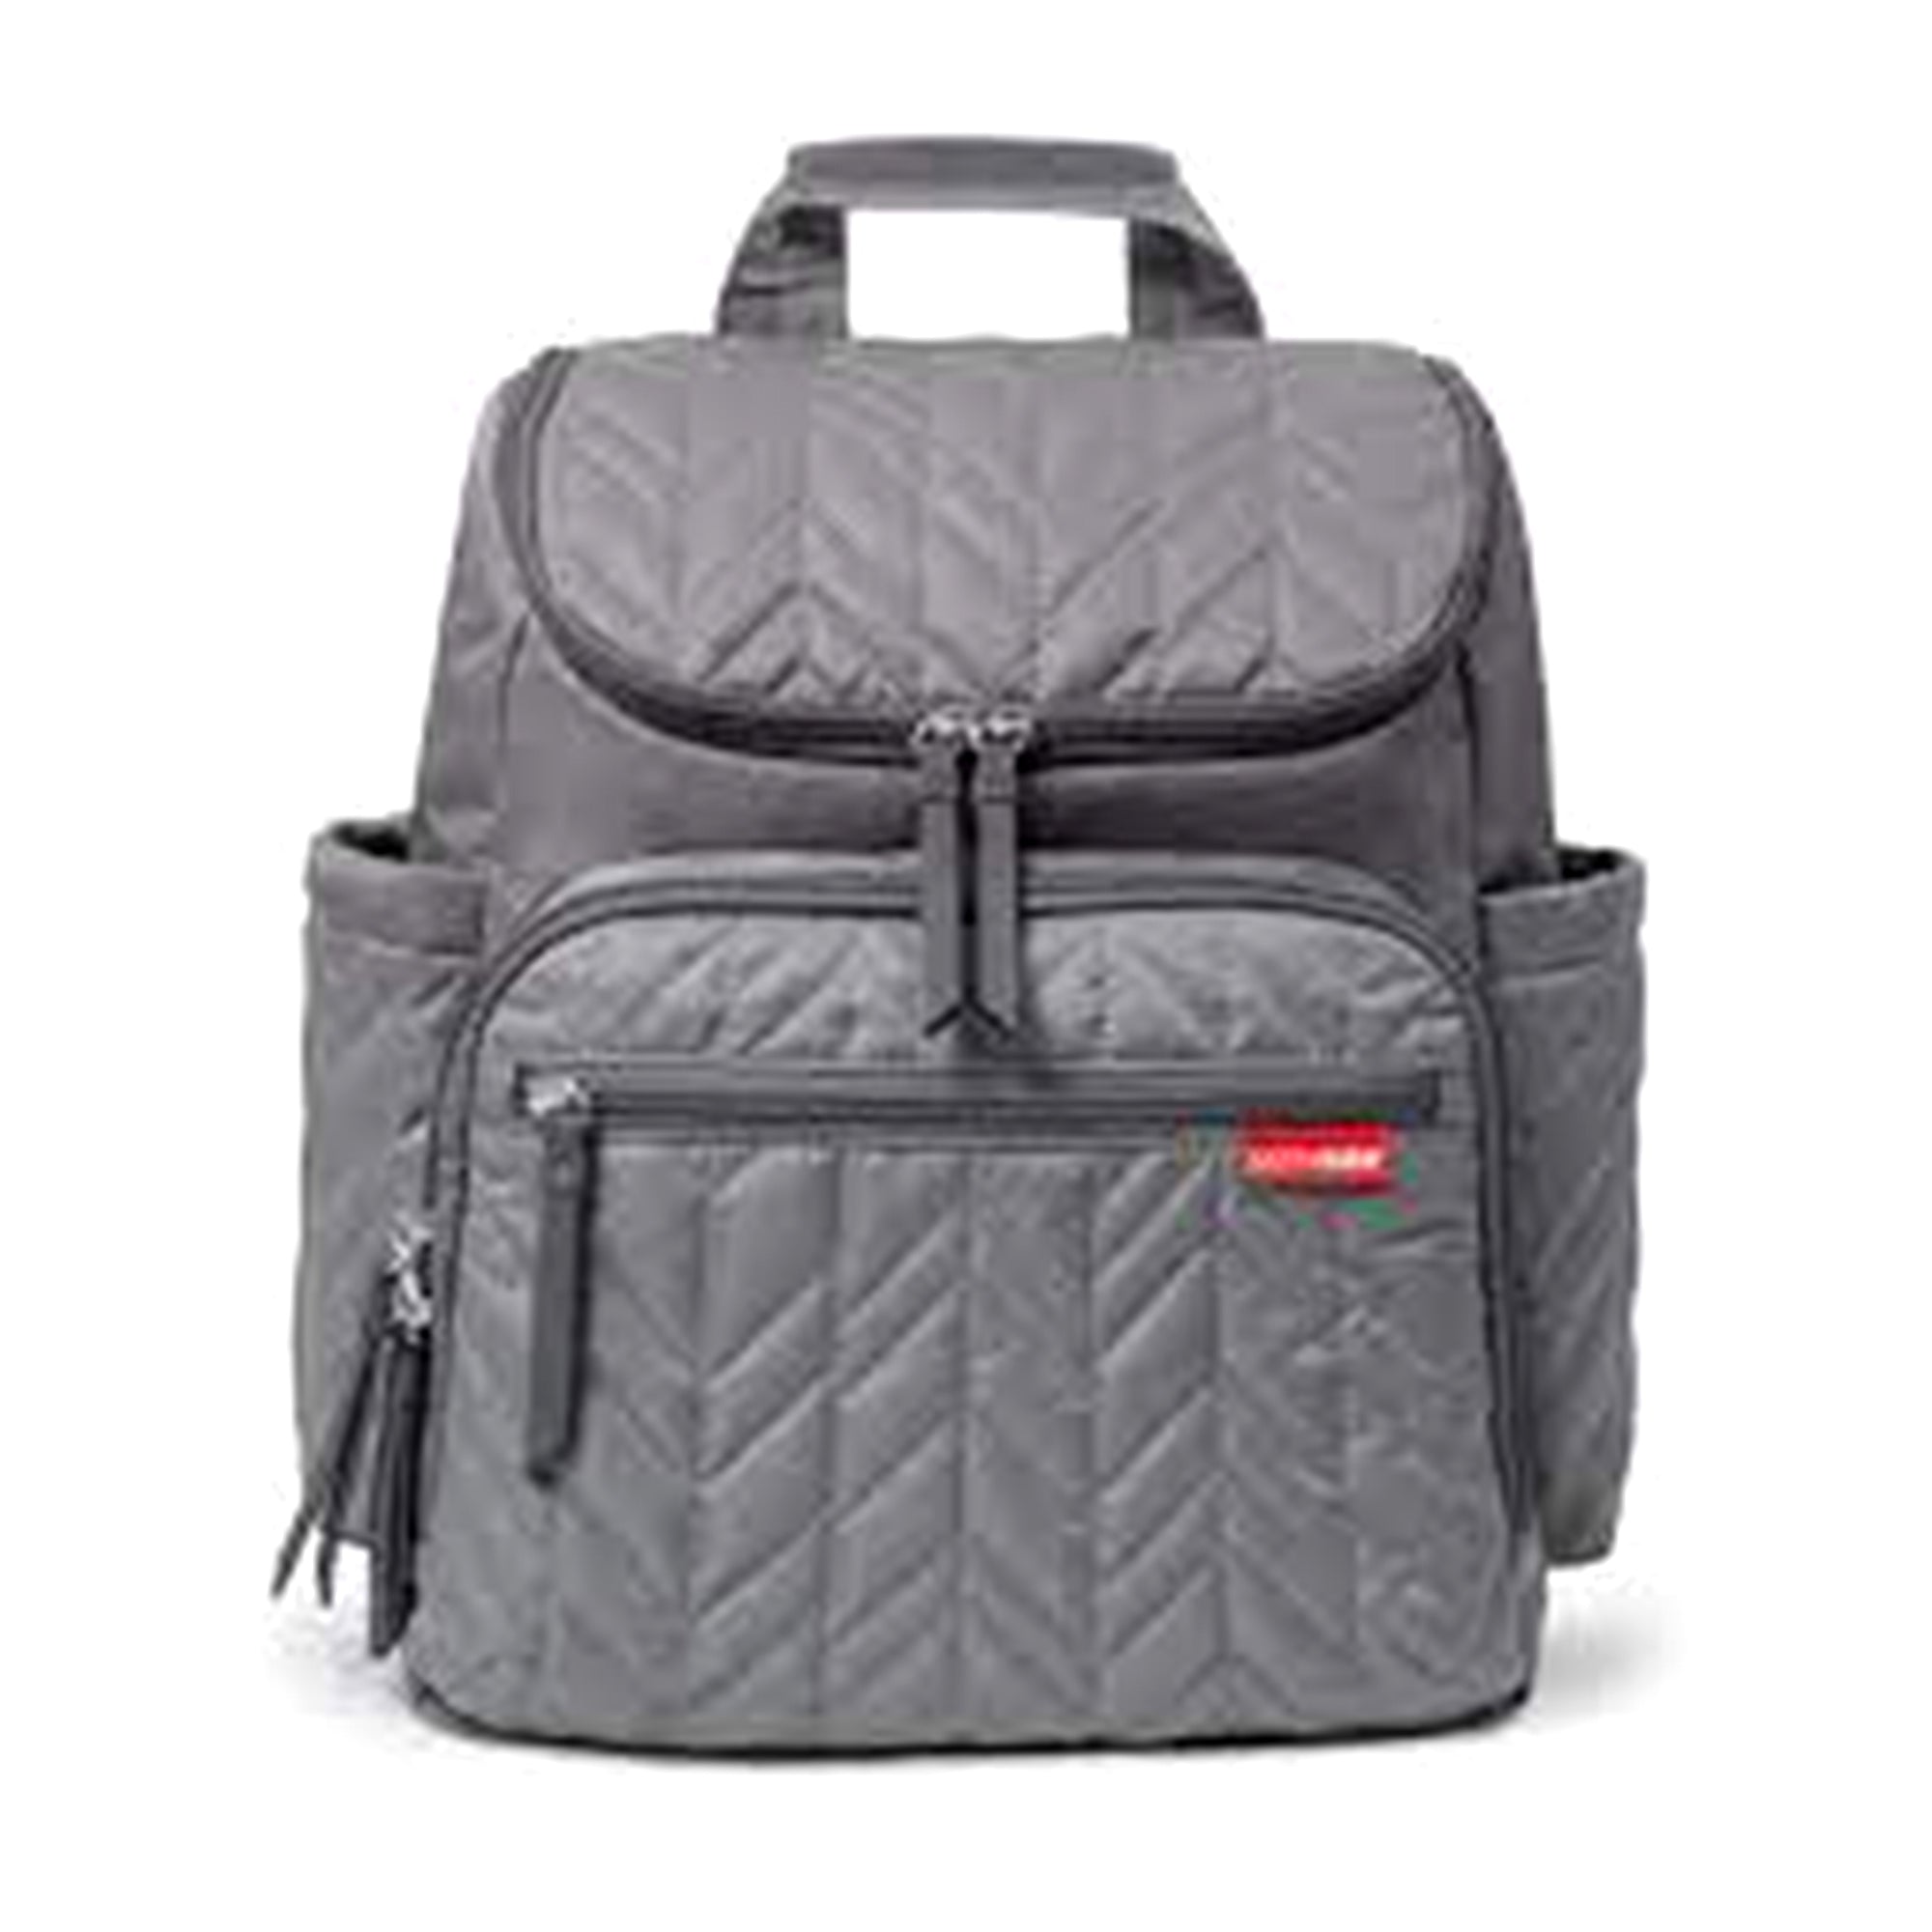 Skip Hop Grey Forma Backpack Diaper Bags || Birth+ to 24months - Toys4All.in